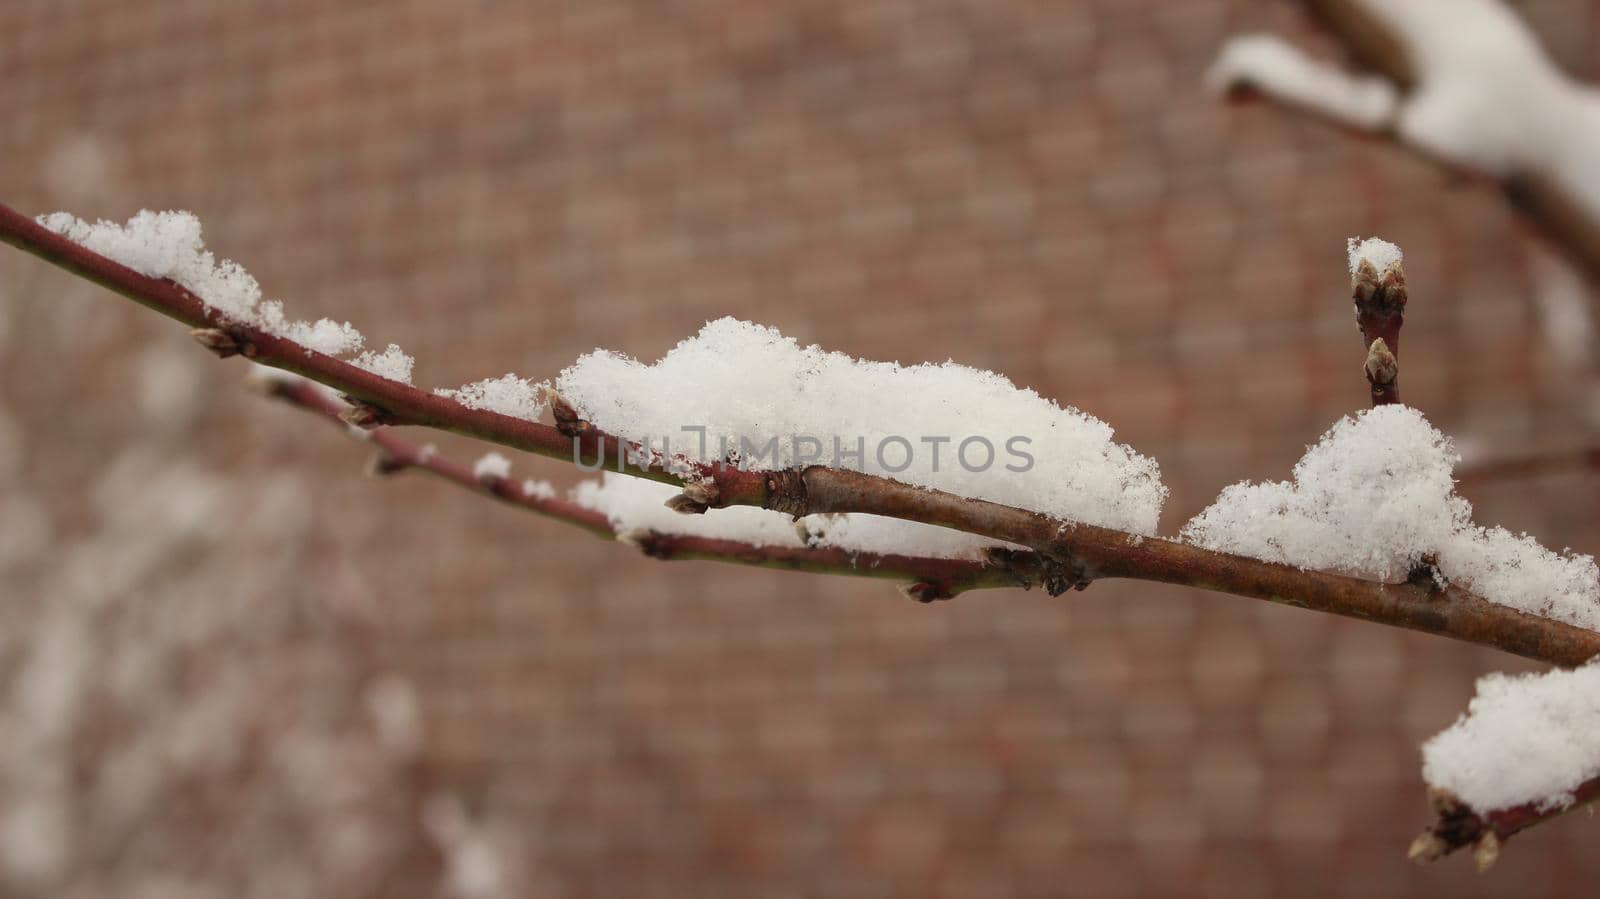 Snow on leaves of plant during snowfall winter season. closeup view of snowflakes on plant in park